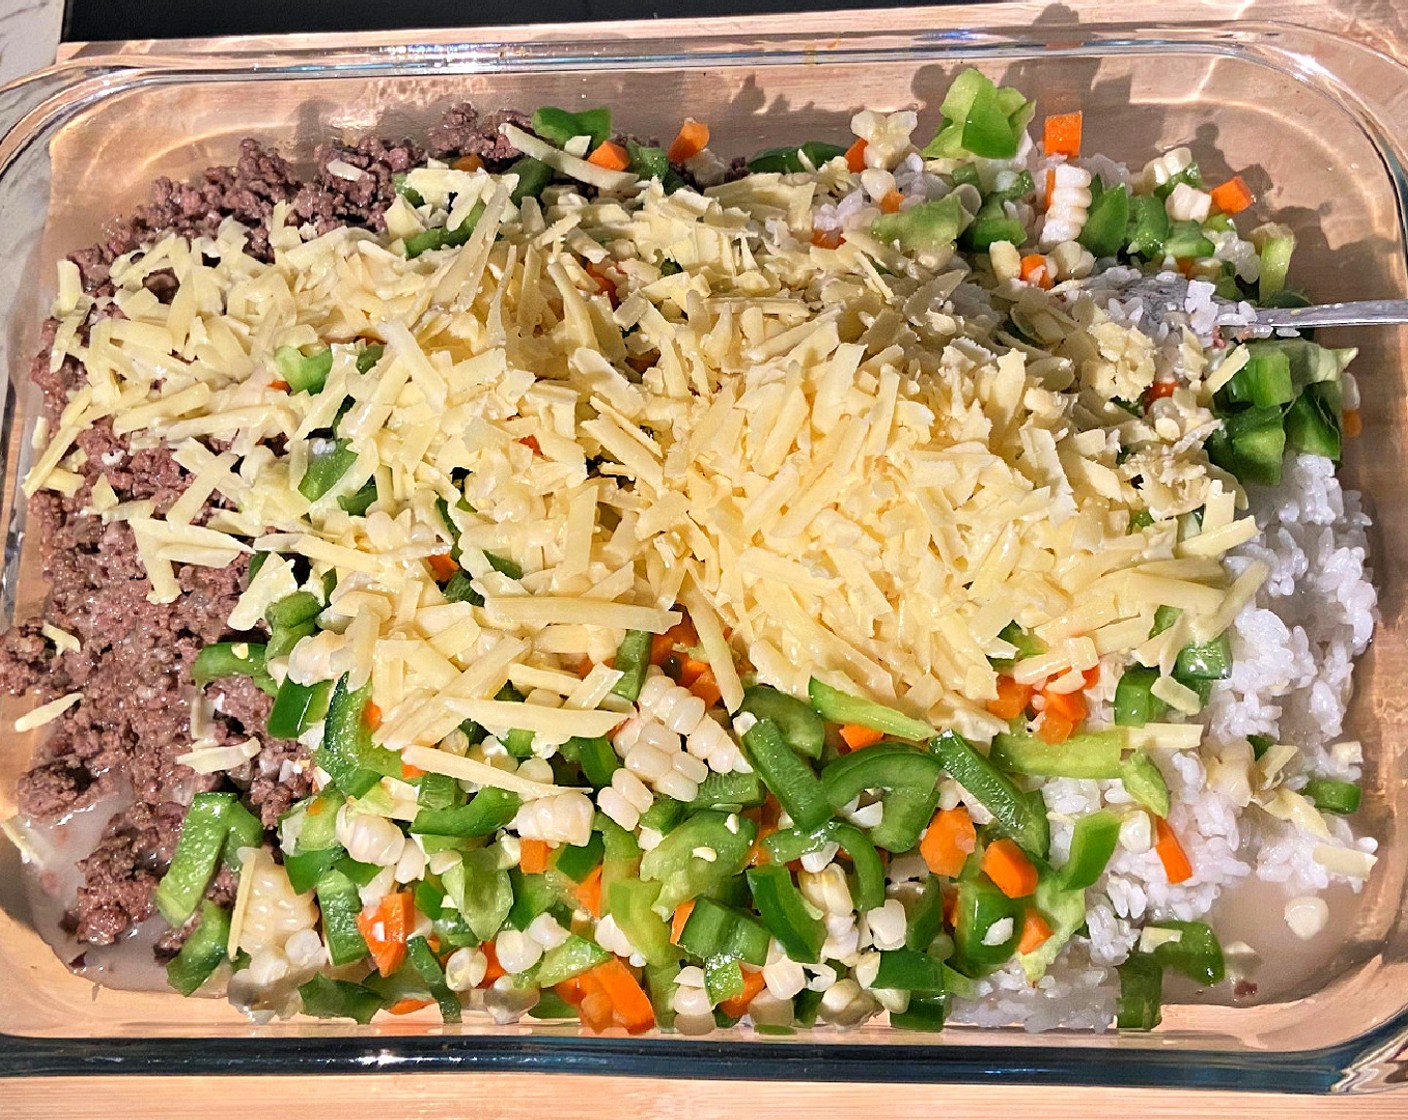 step 5 Combine the cooked beef with the cooked White Rice (2 1/2 Tbsp), Mixed Vegetables (1 cup), Shredded Cheddar Cheese (1 cup), and Chicken Stock (1 1/2 cups).